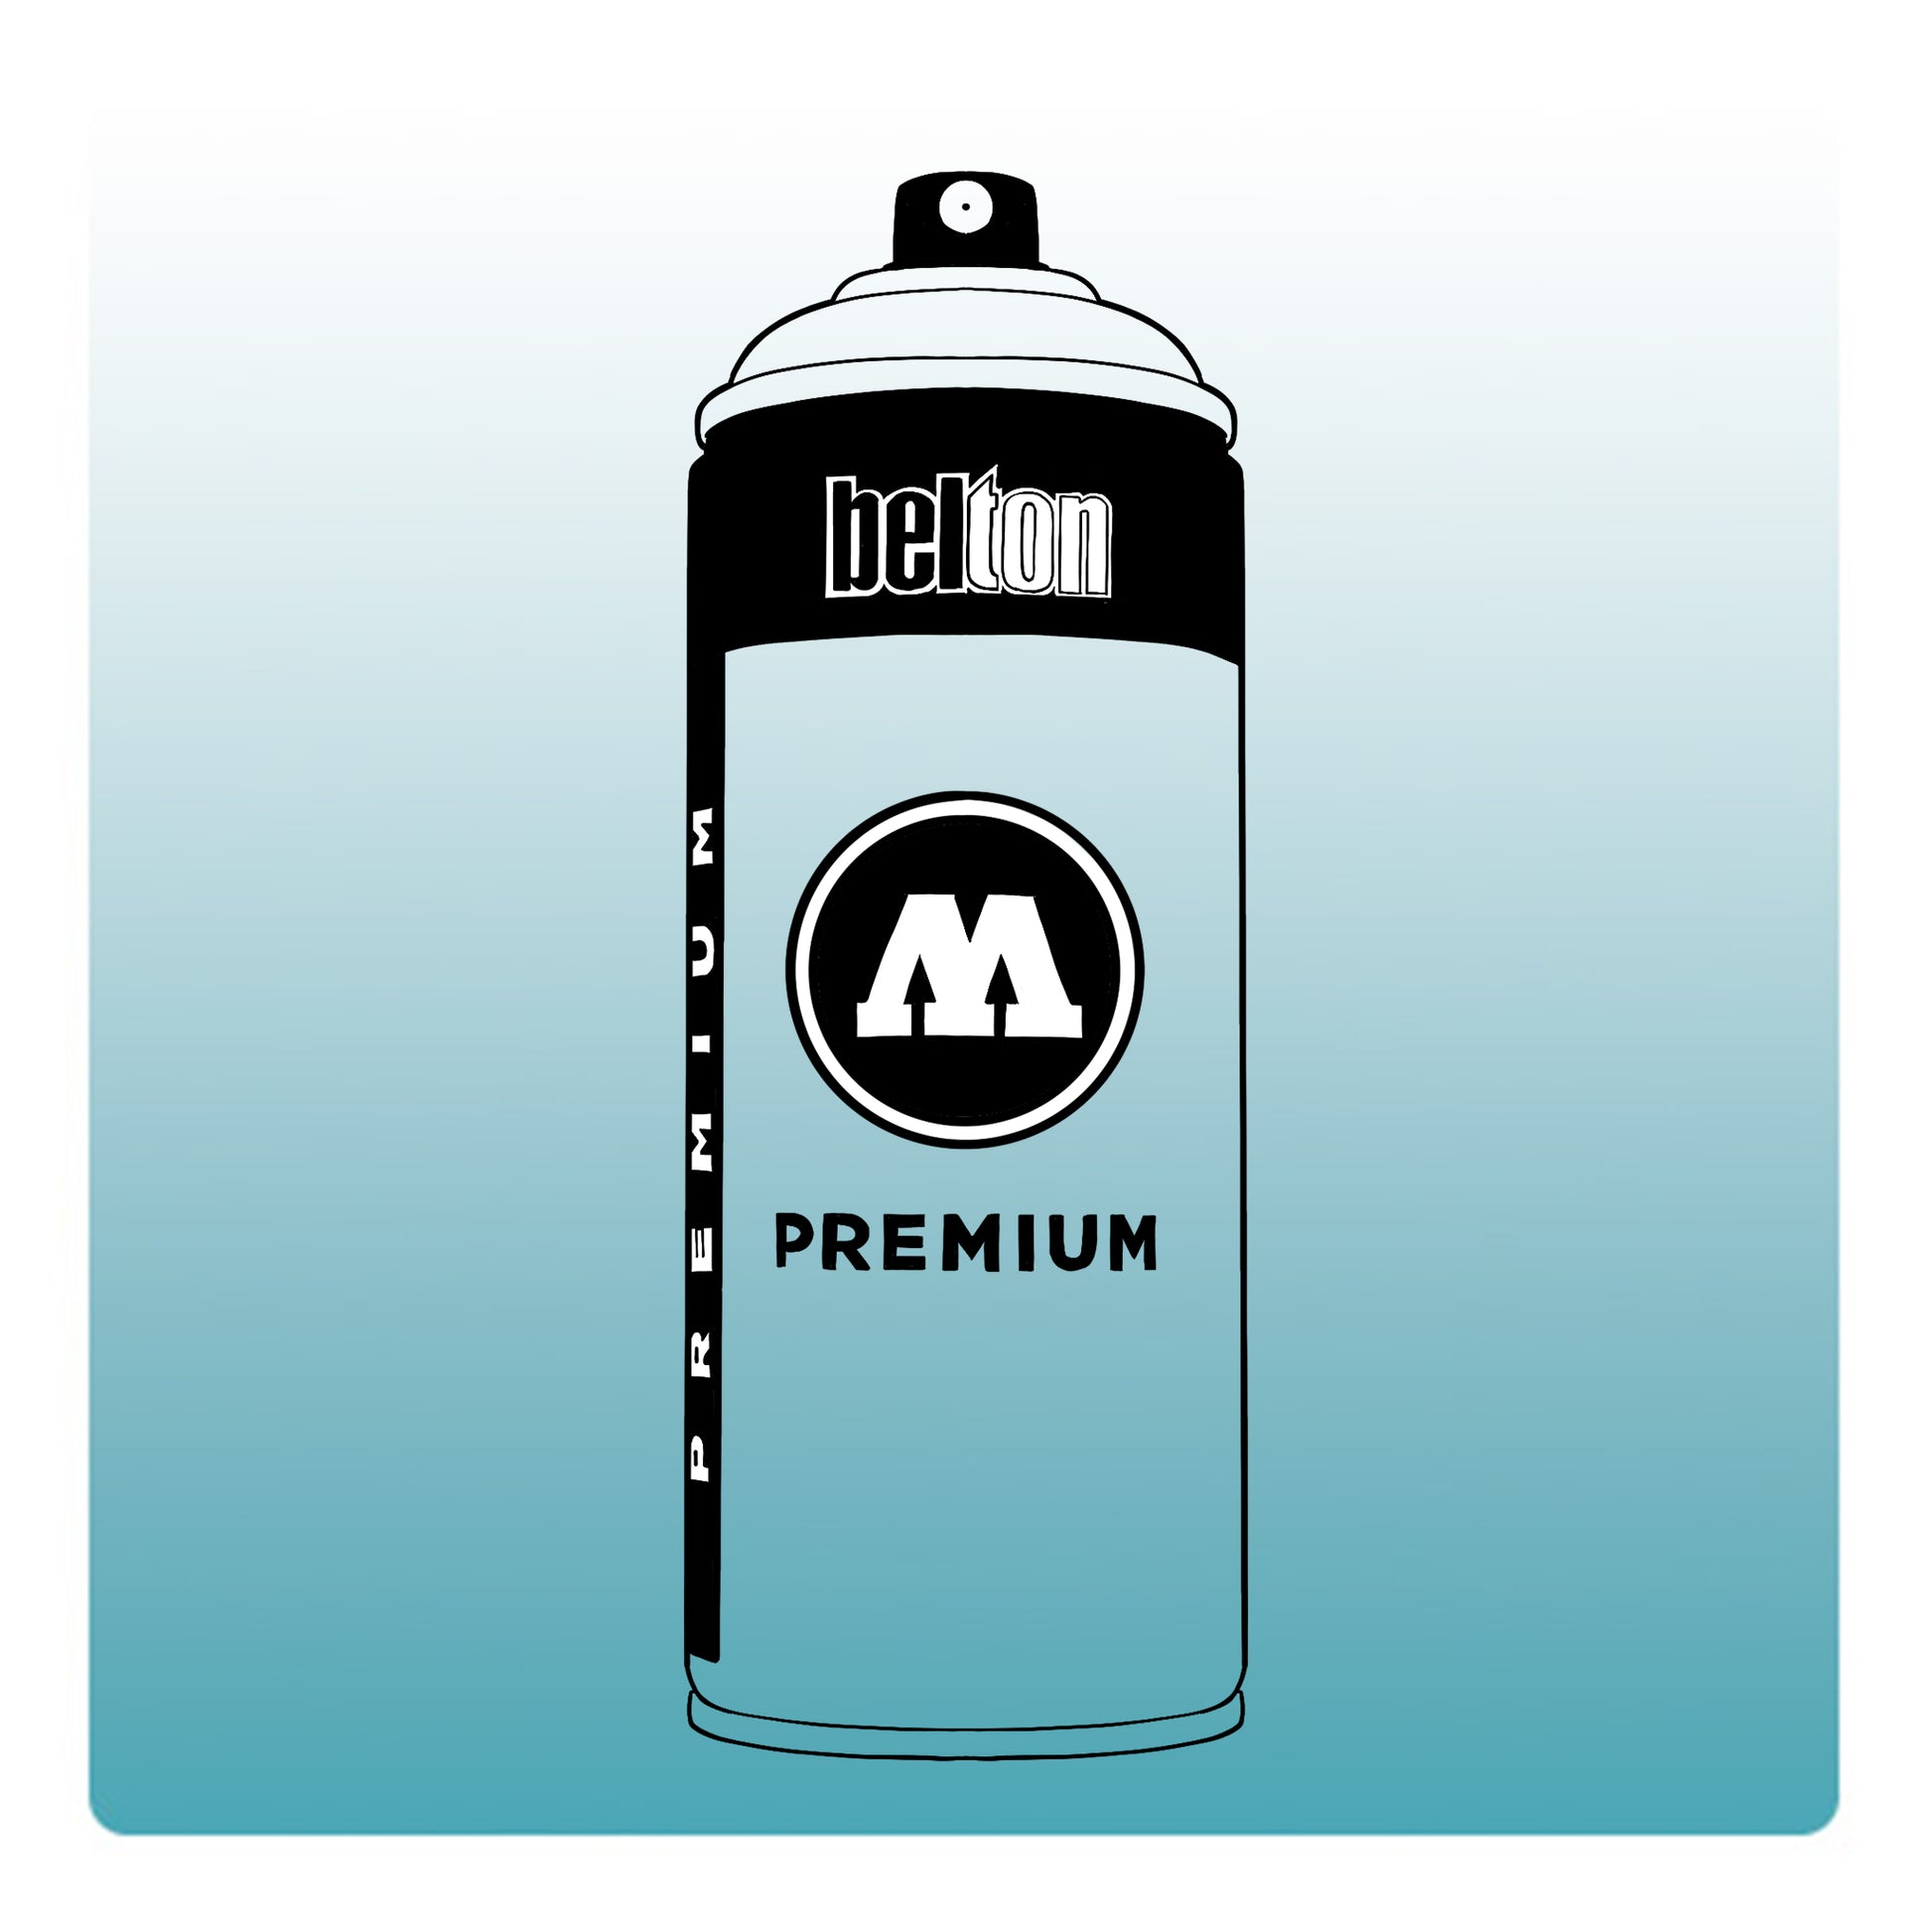 A line drawing of a spray paint can with a transparent, teal color swatch.